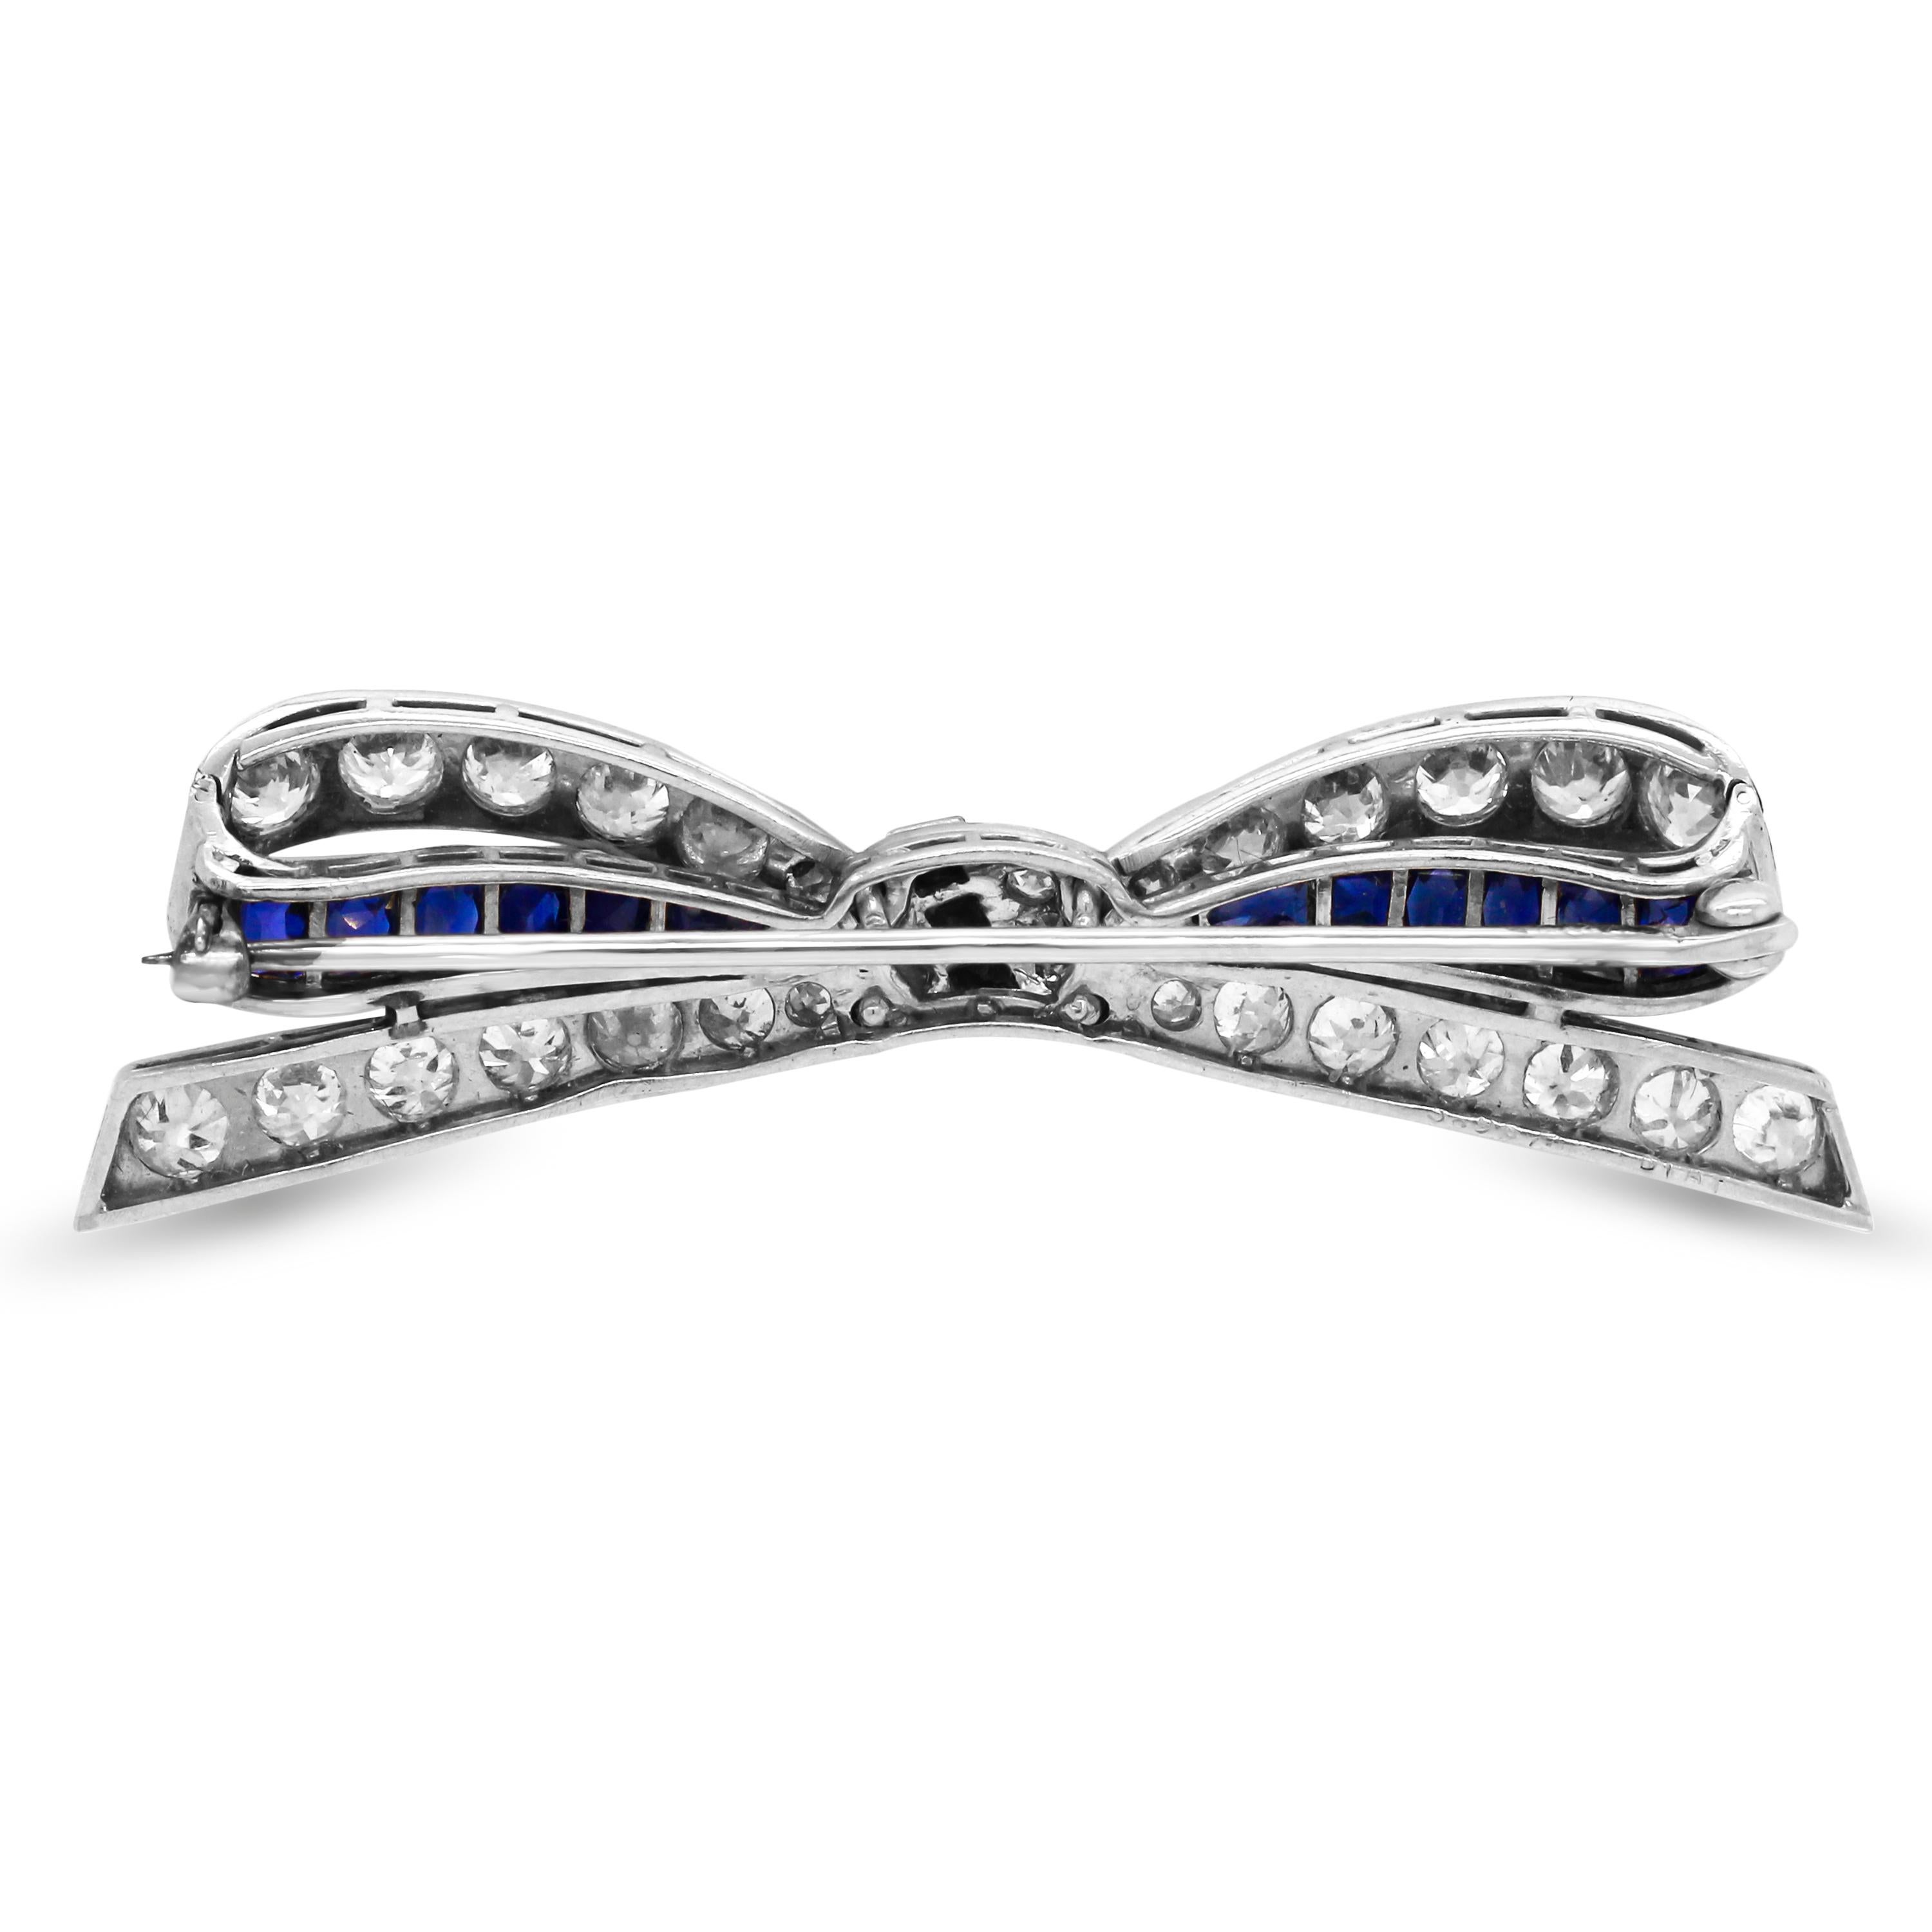 Princess Cut Blue Sapphire Round Diamonds Platinum Antique Ribbon Pin Brooche

This beautiful Antique Brooche is the perfect gift for the lover of everything in ribbon/bow designs

Apprx. 3.00 carat G color, VS clairty diamonds

5.30 carat Blue